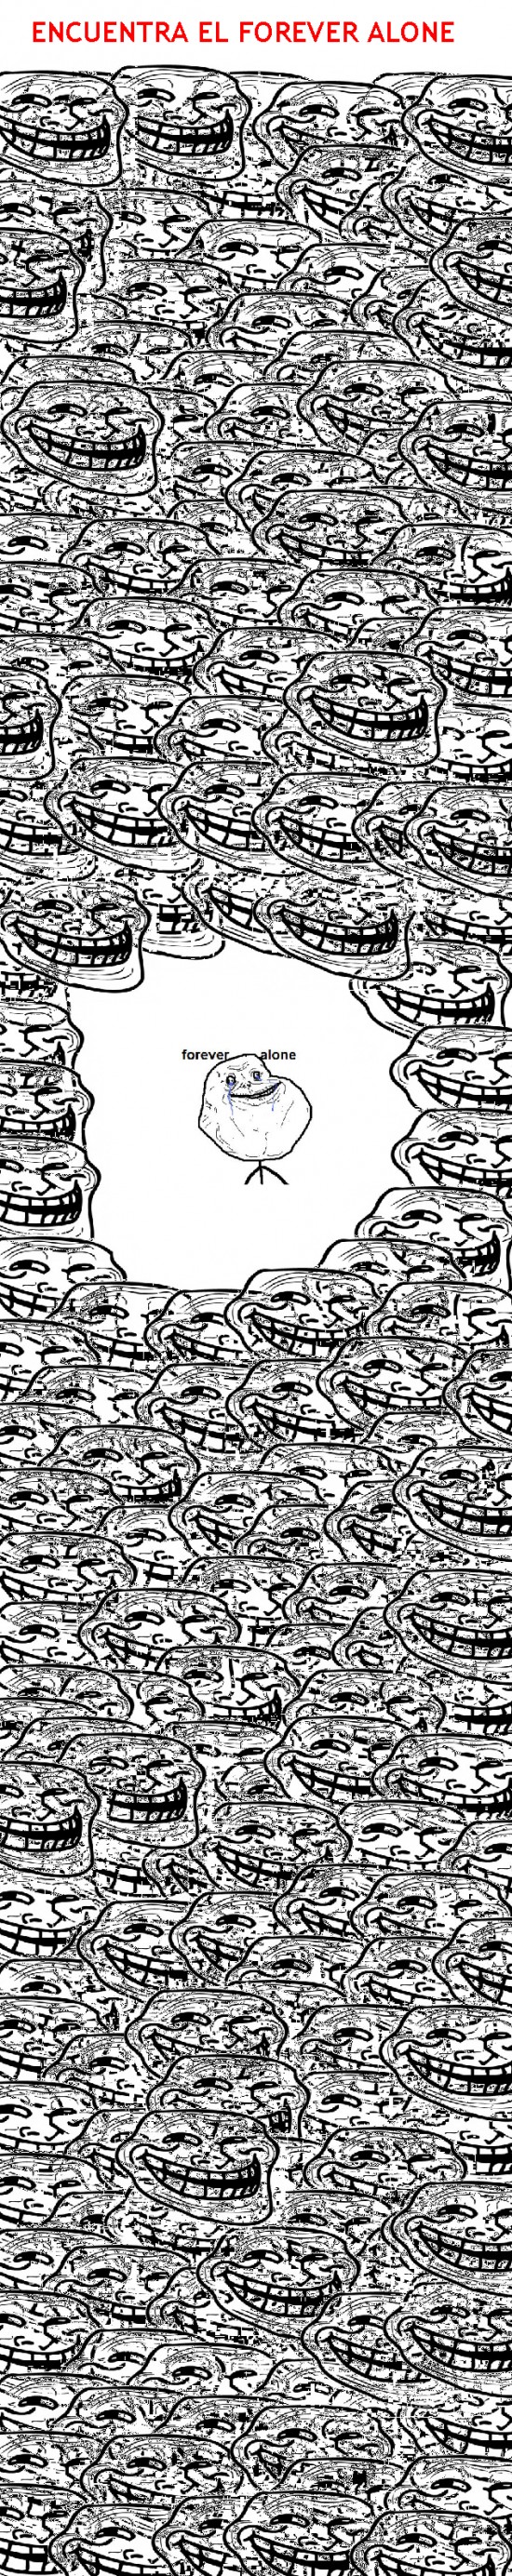 encuentra,forever alone,troll face